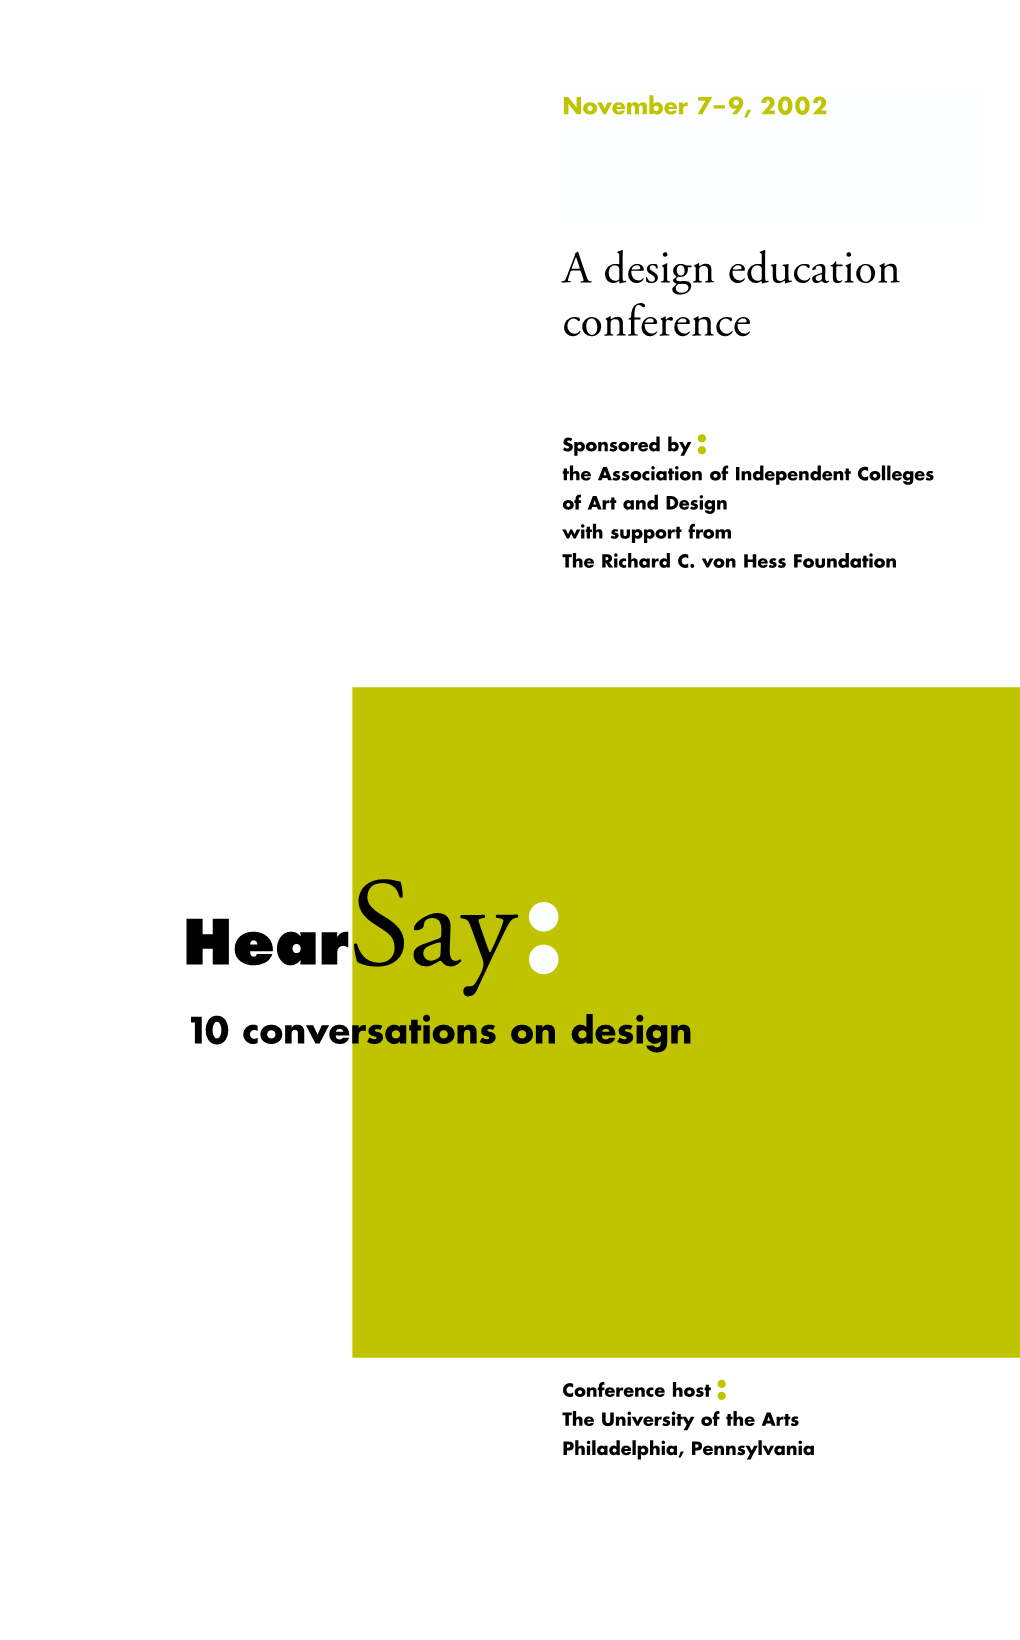 AICAD Hearsay Conference at the University of the Arts, and Reserve by the Cut Off Date That Is Indicated